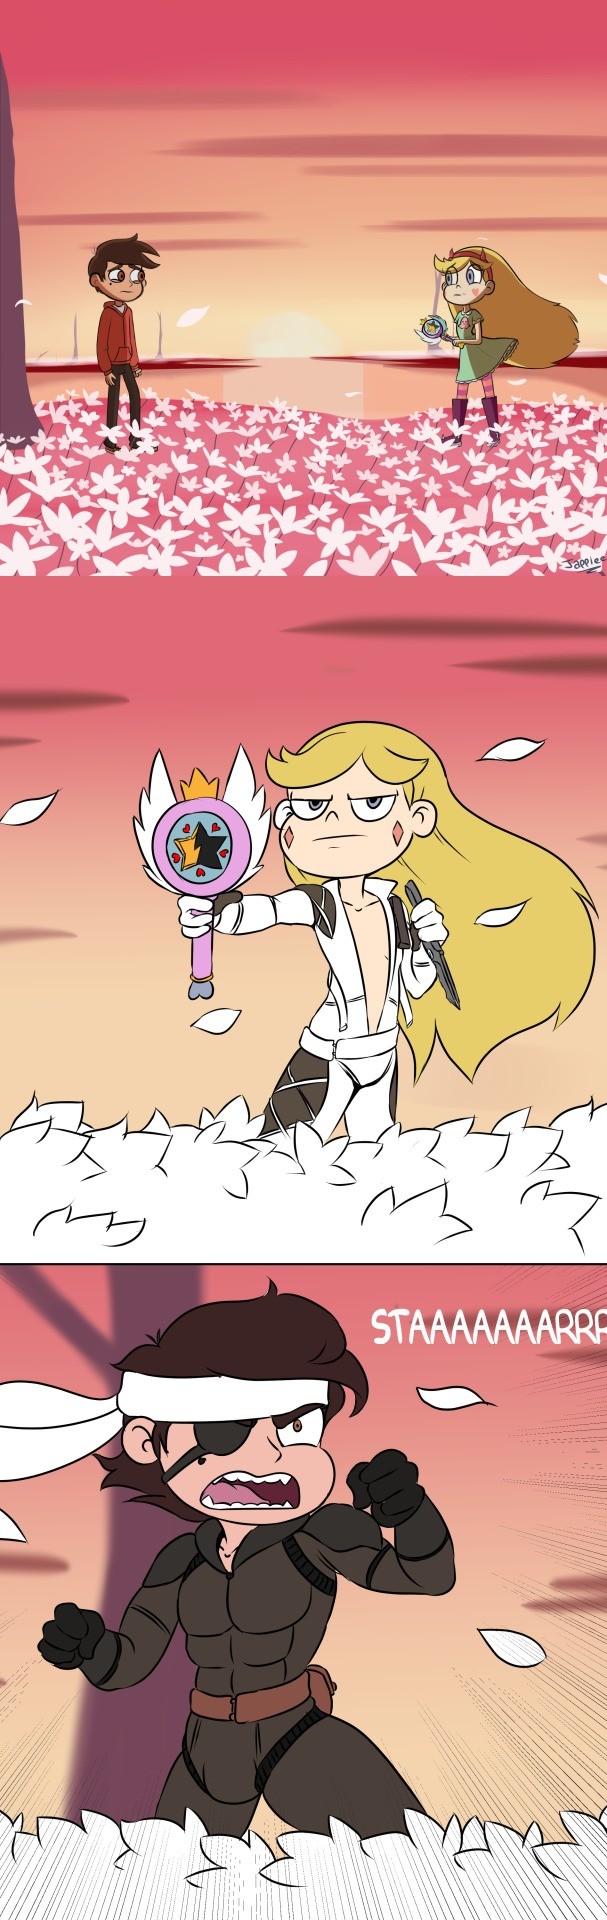 Metal Wand Solid 3. The Star: In 2017 I saw a vision of the ideal relationship from Mewni....